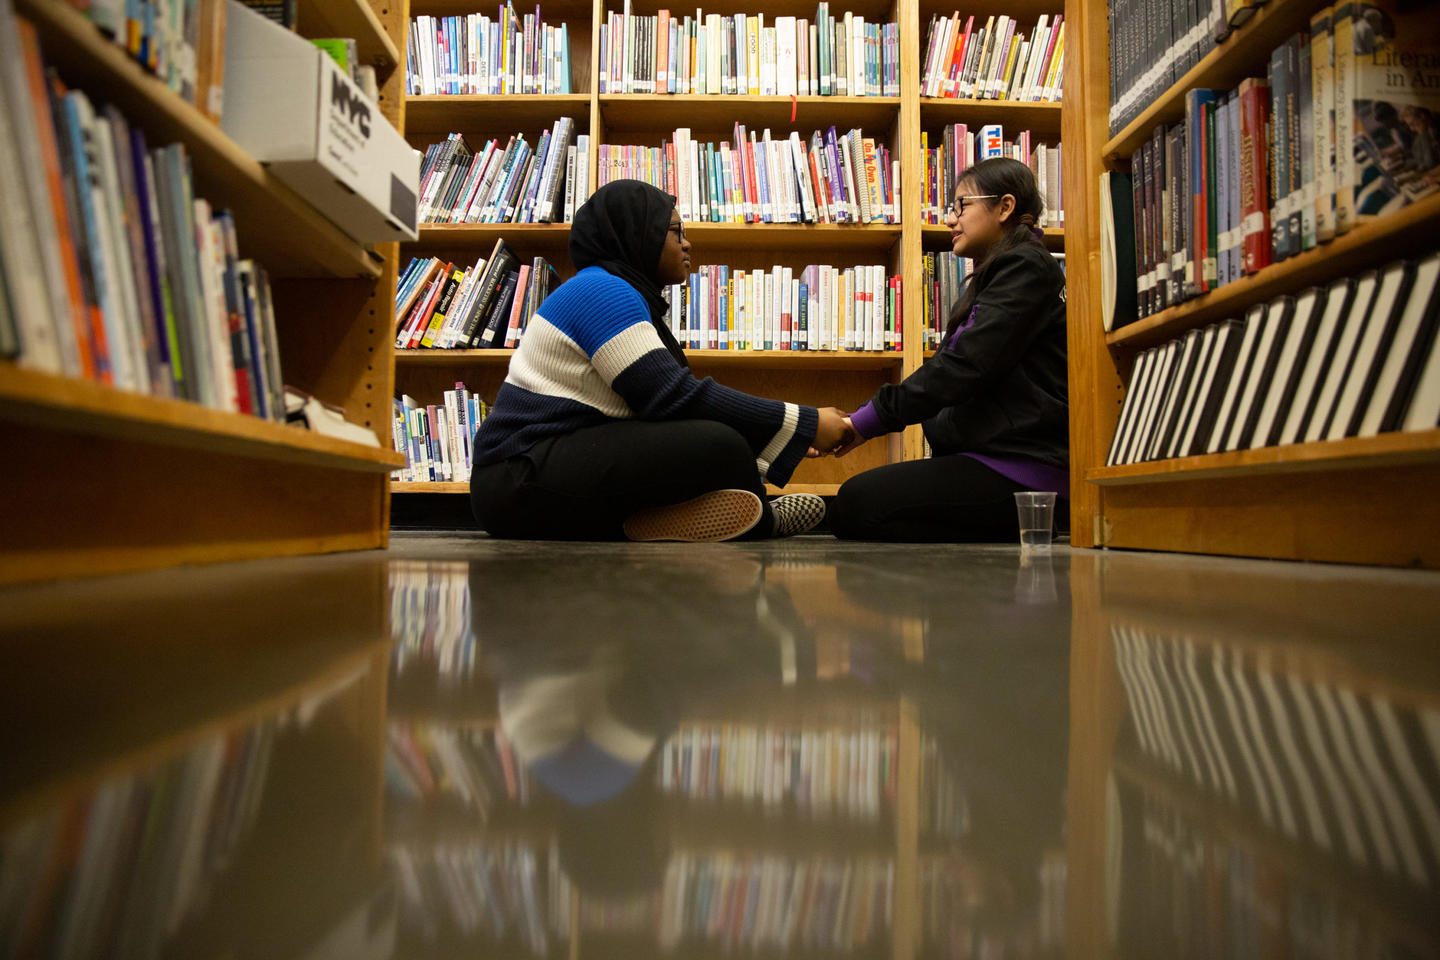 Two students sitting holding hands in a library